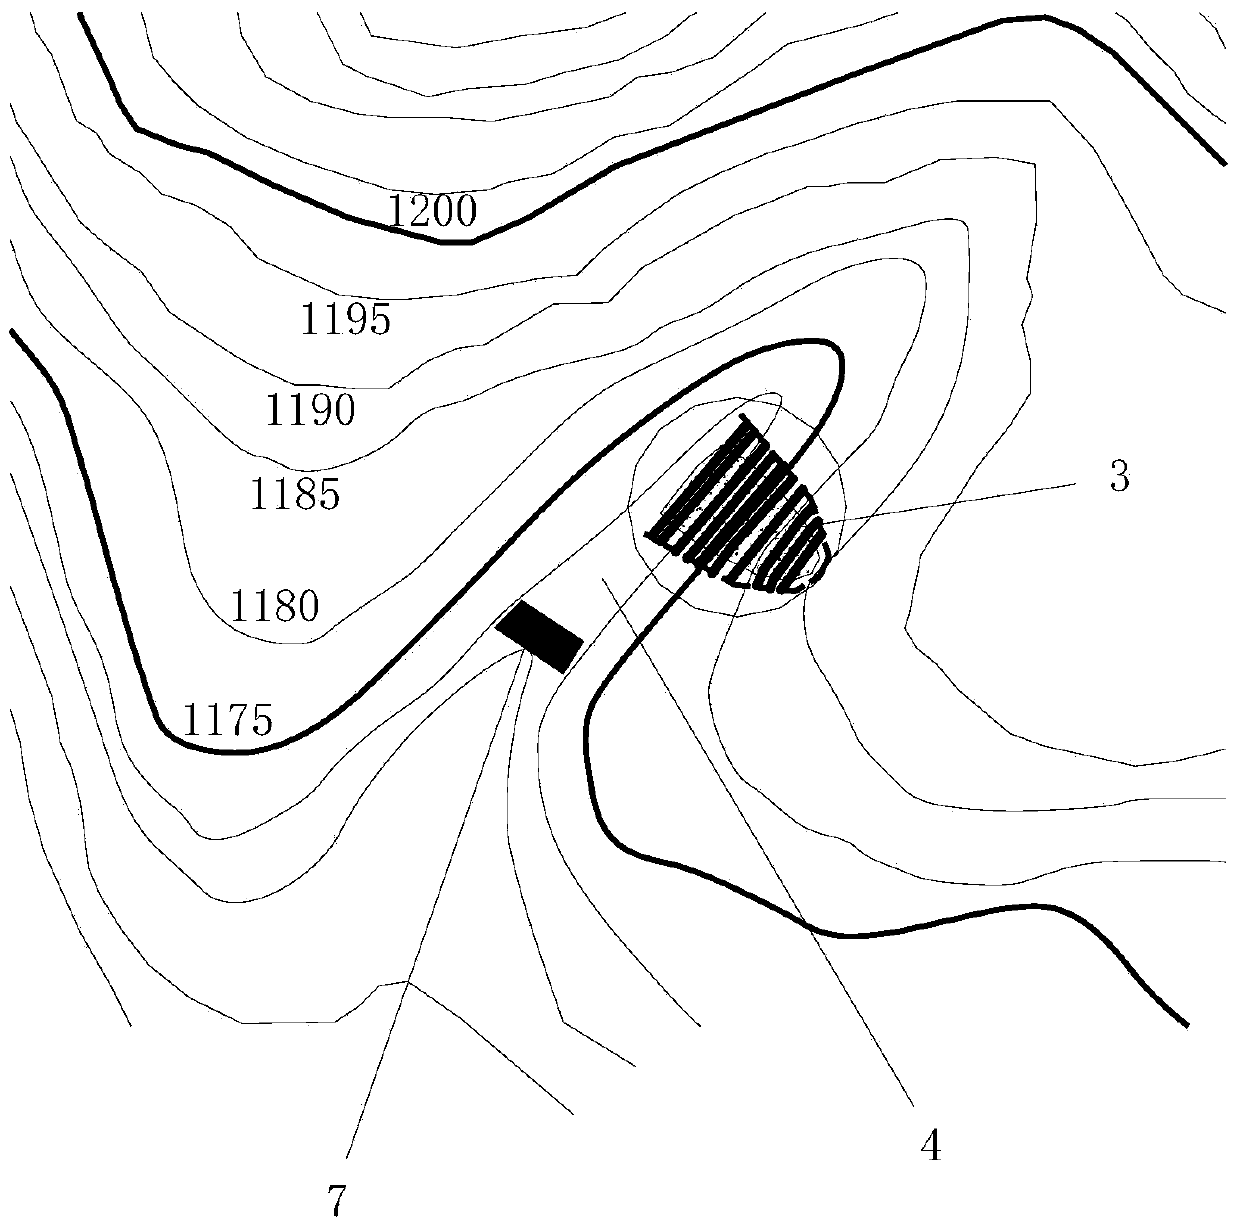 Loess hilly-and-gully area coal-mining subsidence and crevice treatment method